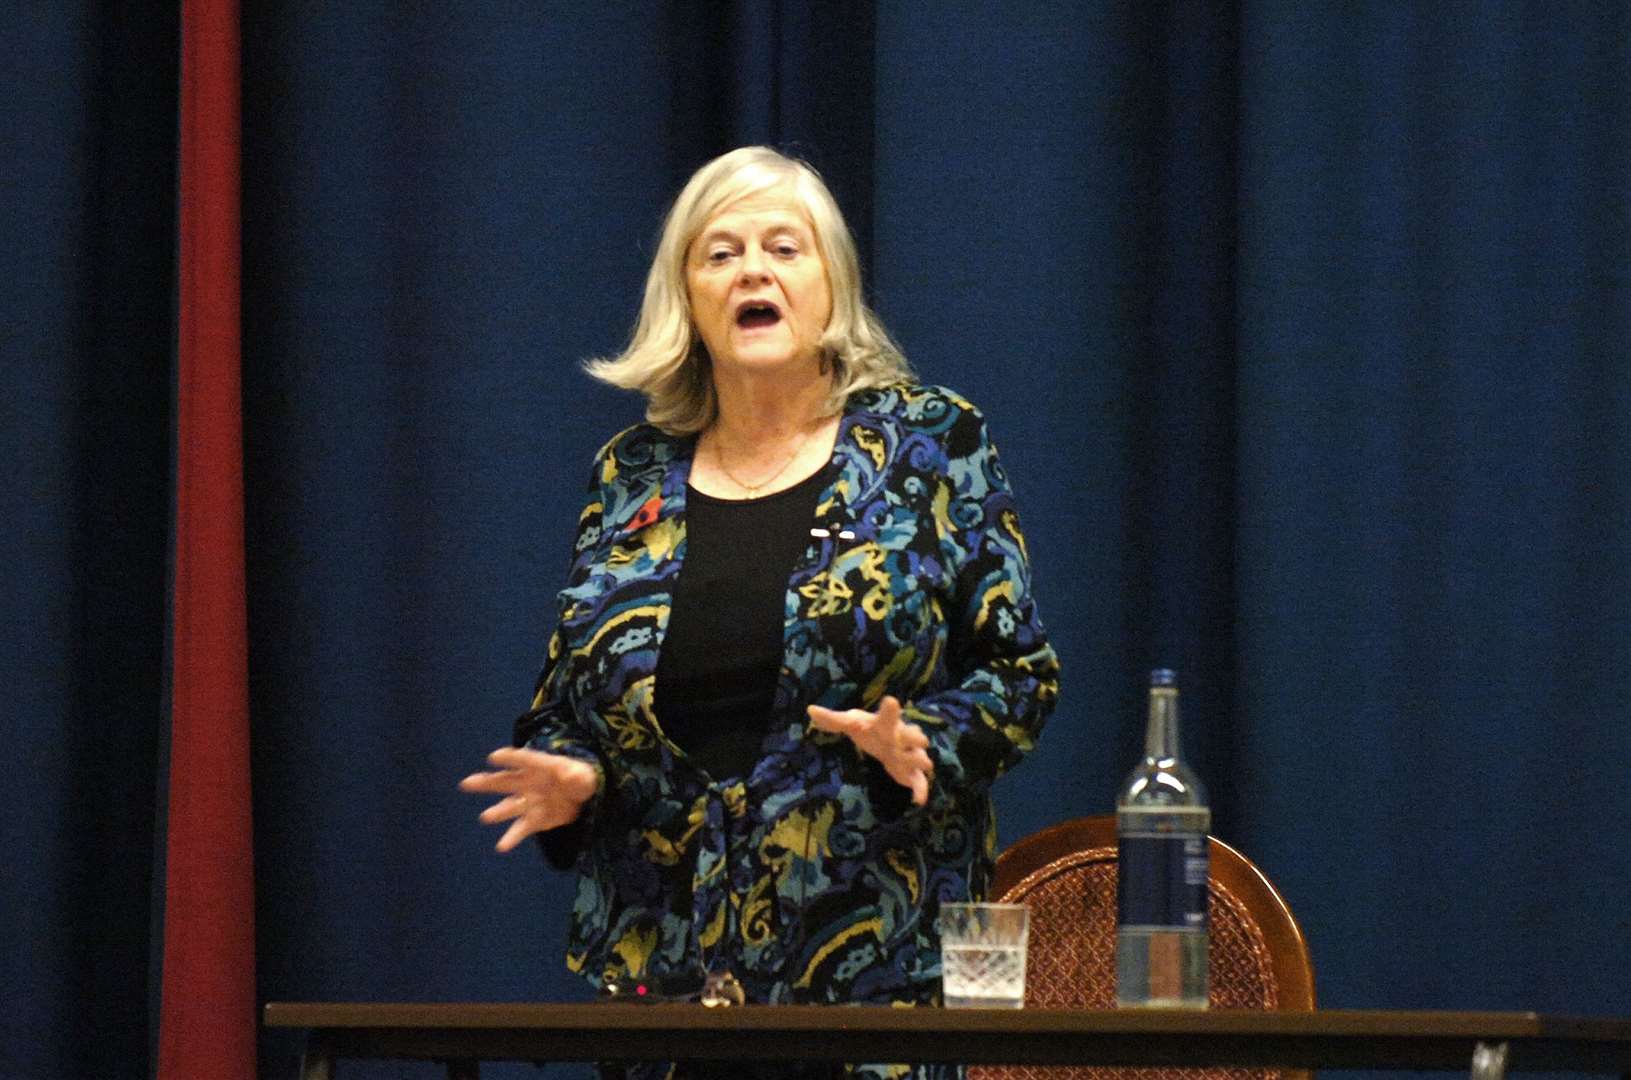 Anne Widdecombe will be joining Nigel Farage